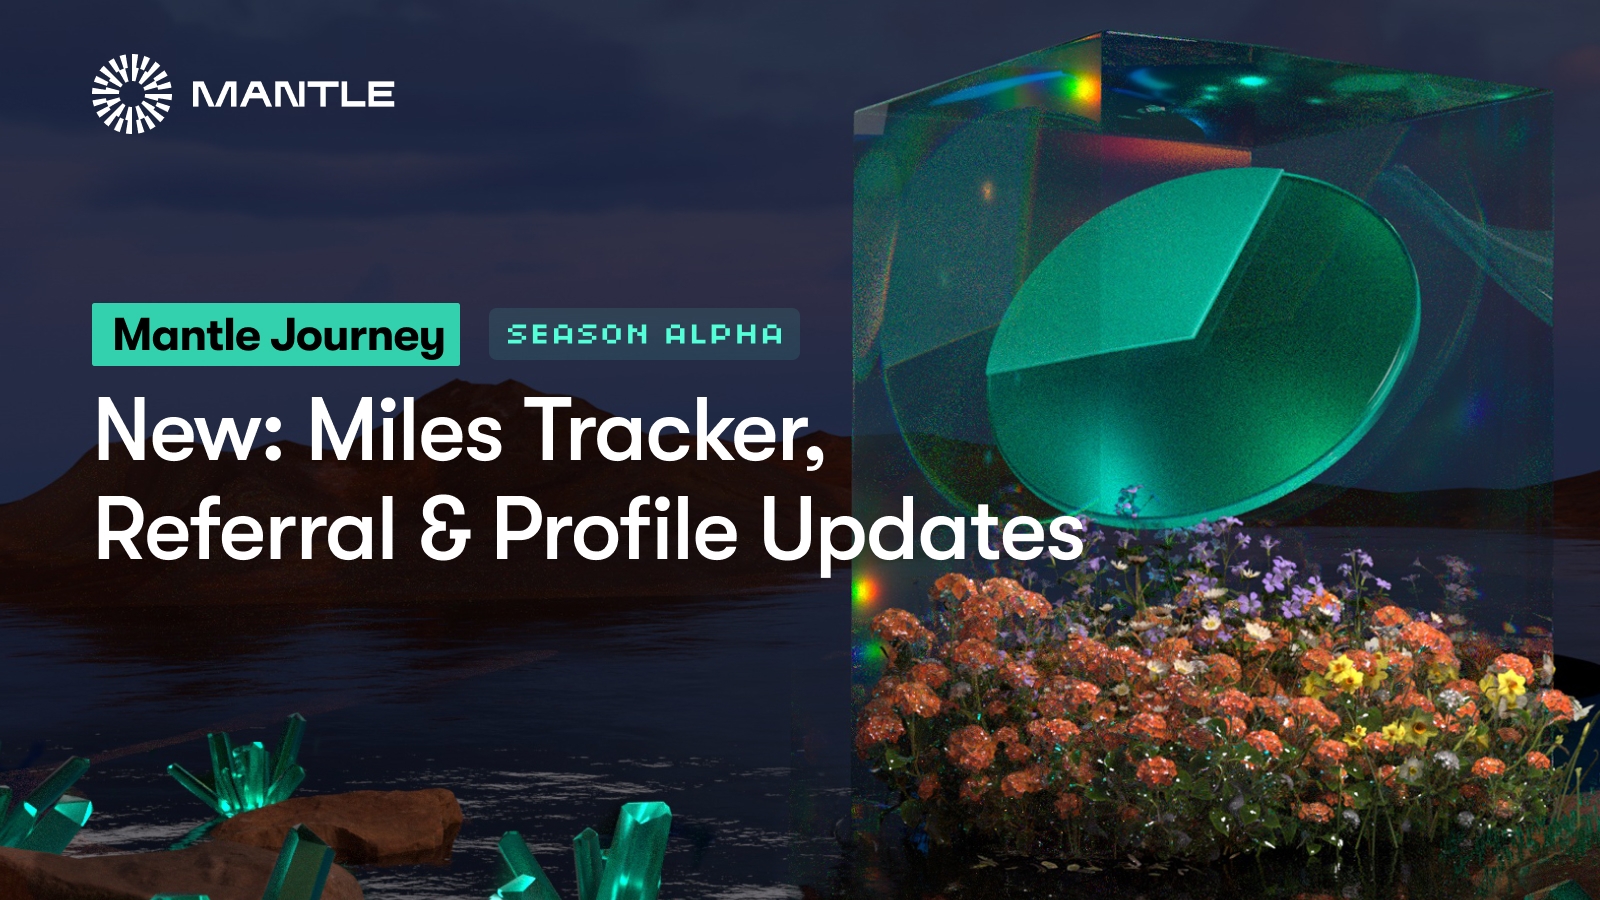 New on Mantle Journey: Miles Tracker, Referral & More